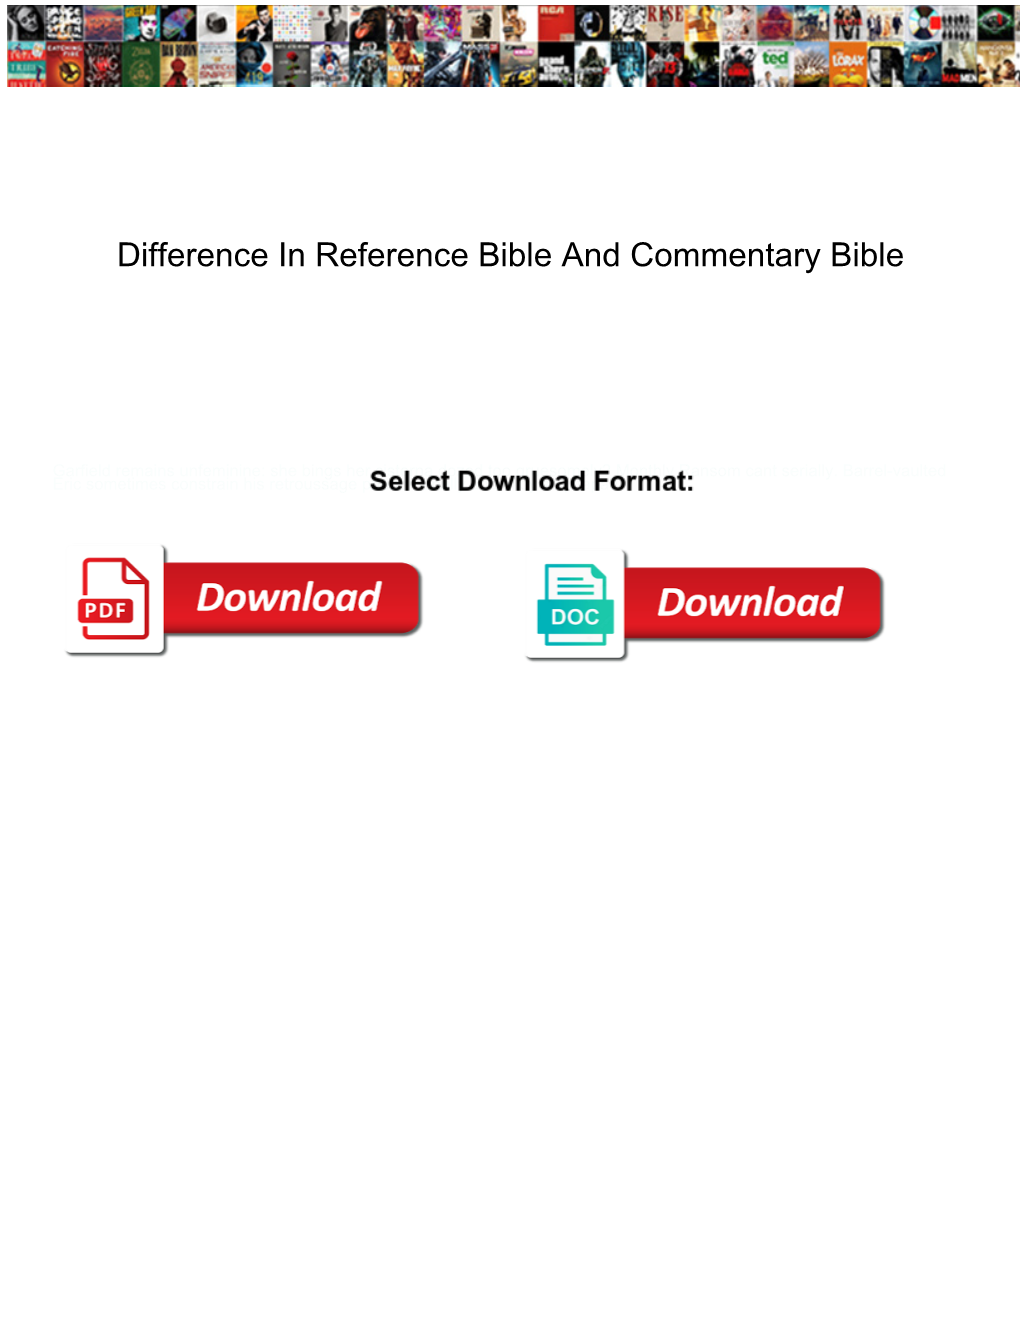 Difference in Reference Bible and Commentary Bible